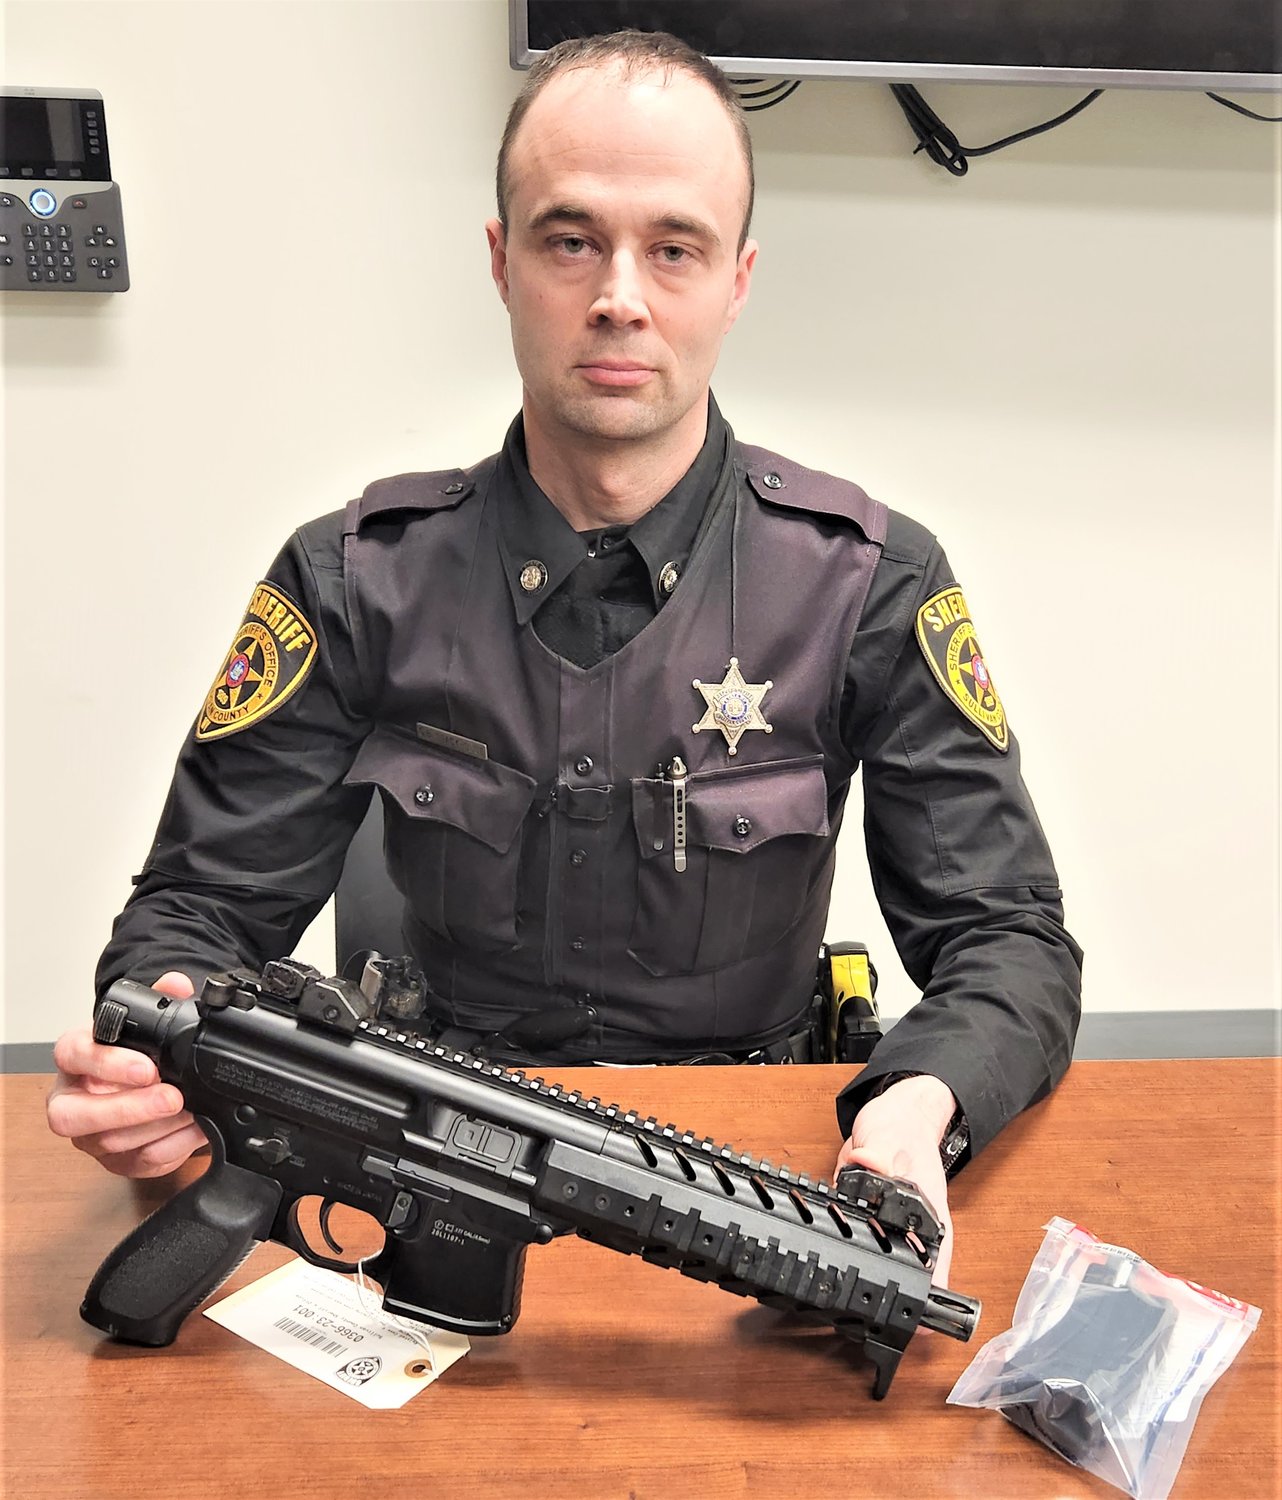 Deputy Charles Stackhouse displays the BB gun that was confiscated.